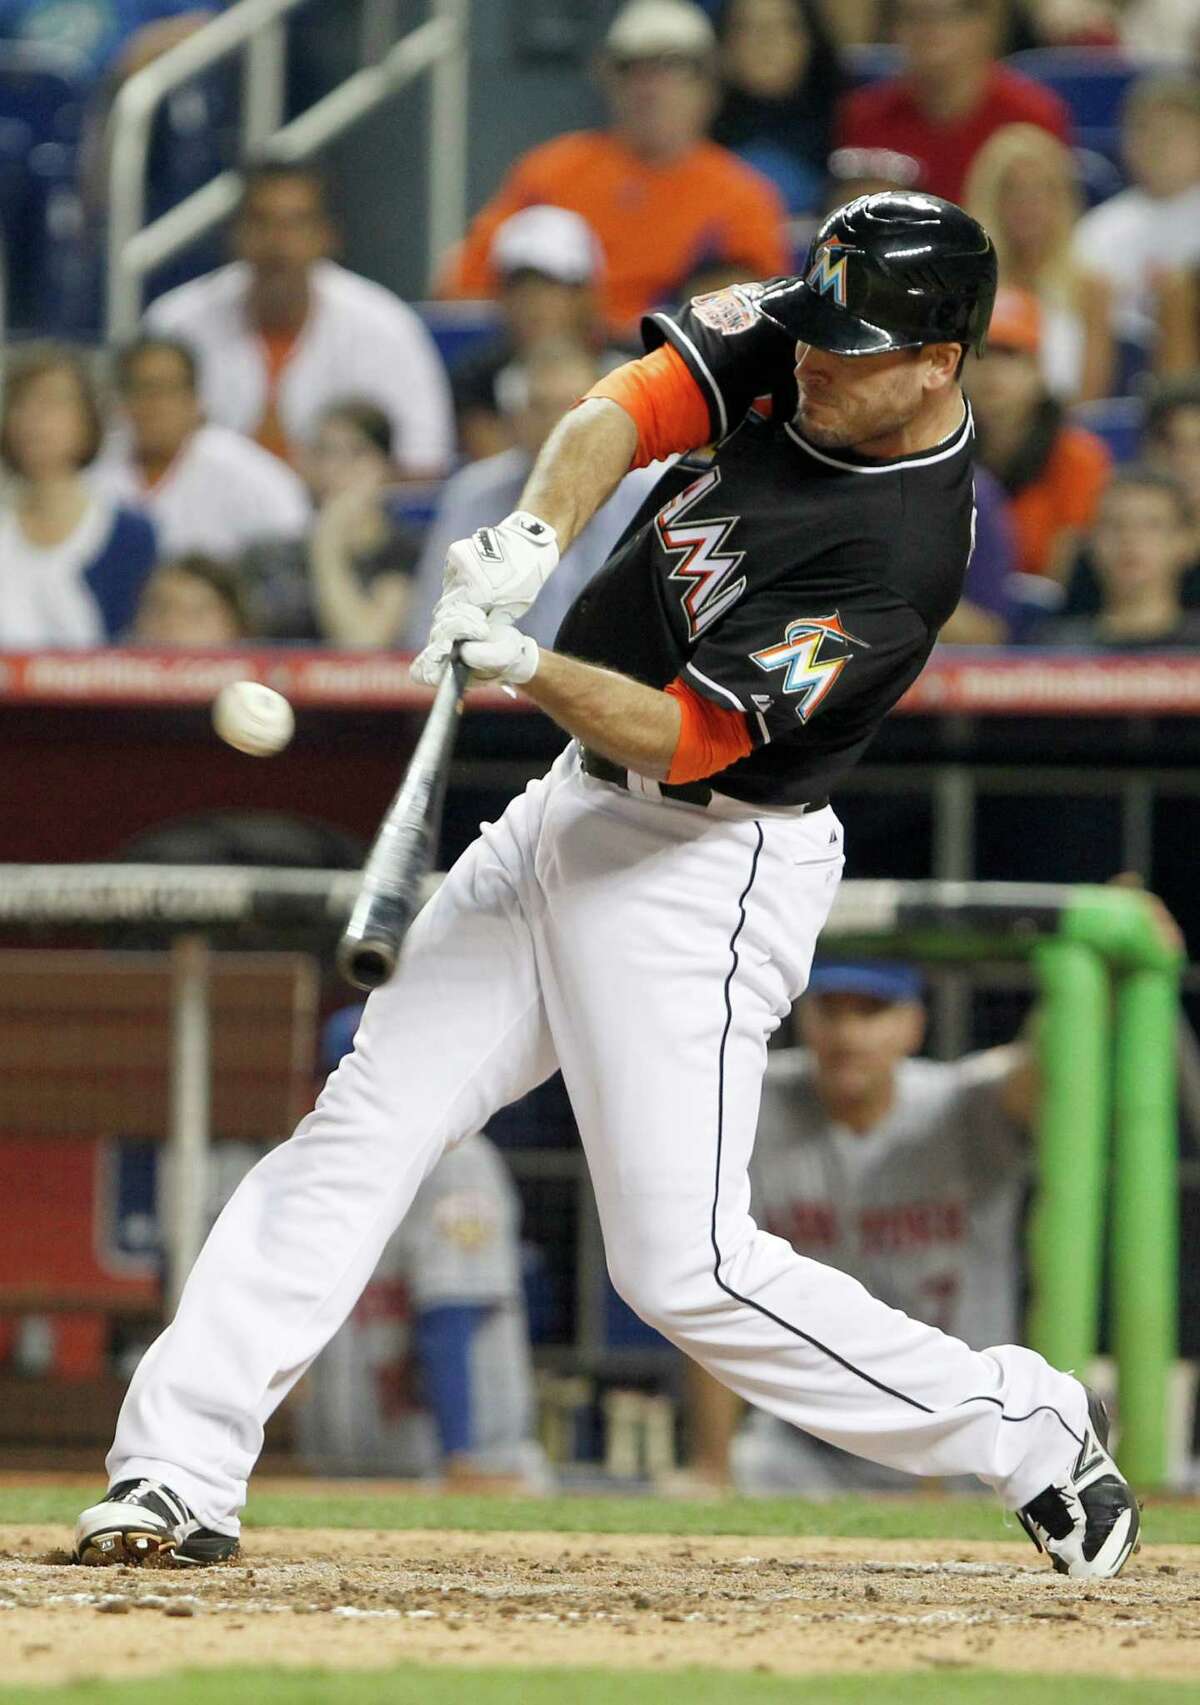 Miami Marlins' Greg Dobbs hits a single to score Emilio Bonifacio for the win during the ninth inning of a baseball game against the New York Mets, Friday, May 11, 2012, in Miami. The Marlins defeated the Mets 6-5.